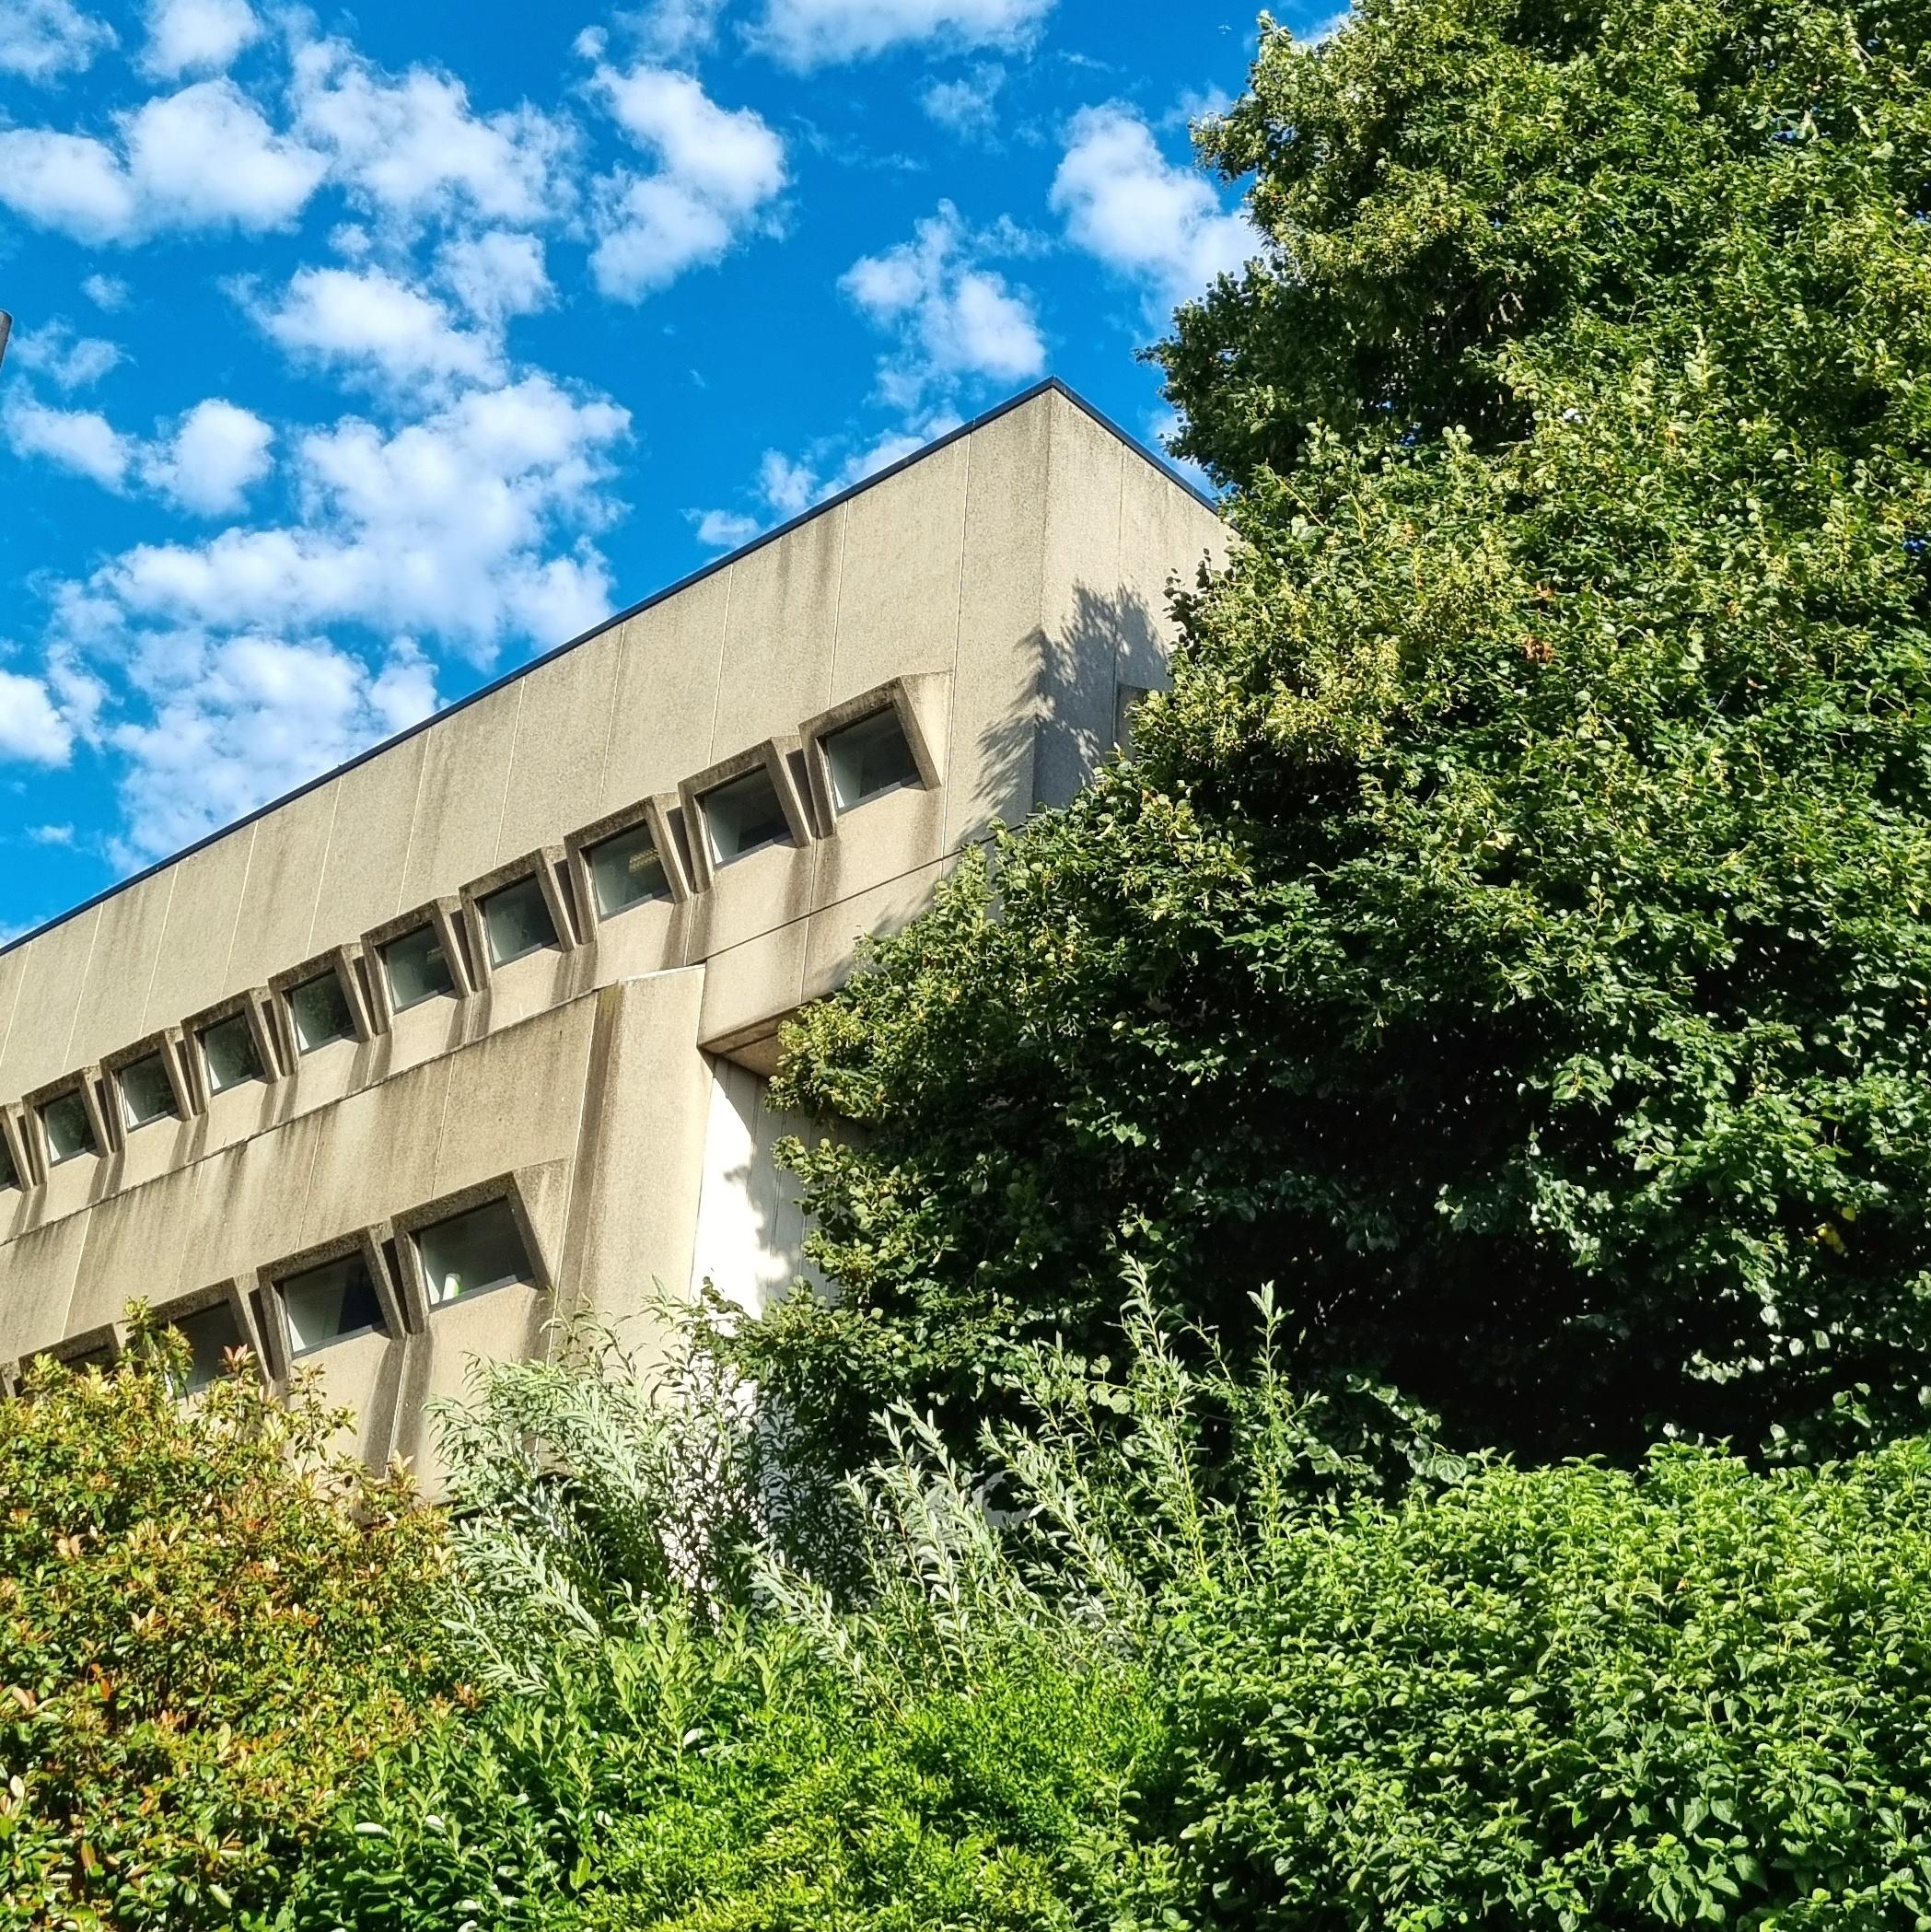 The Arts and Social Sciences Library under a blue sky, viewed through trees.